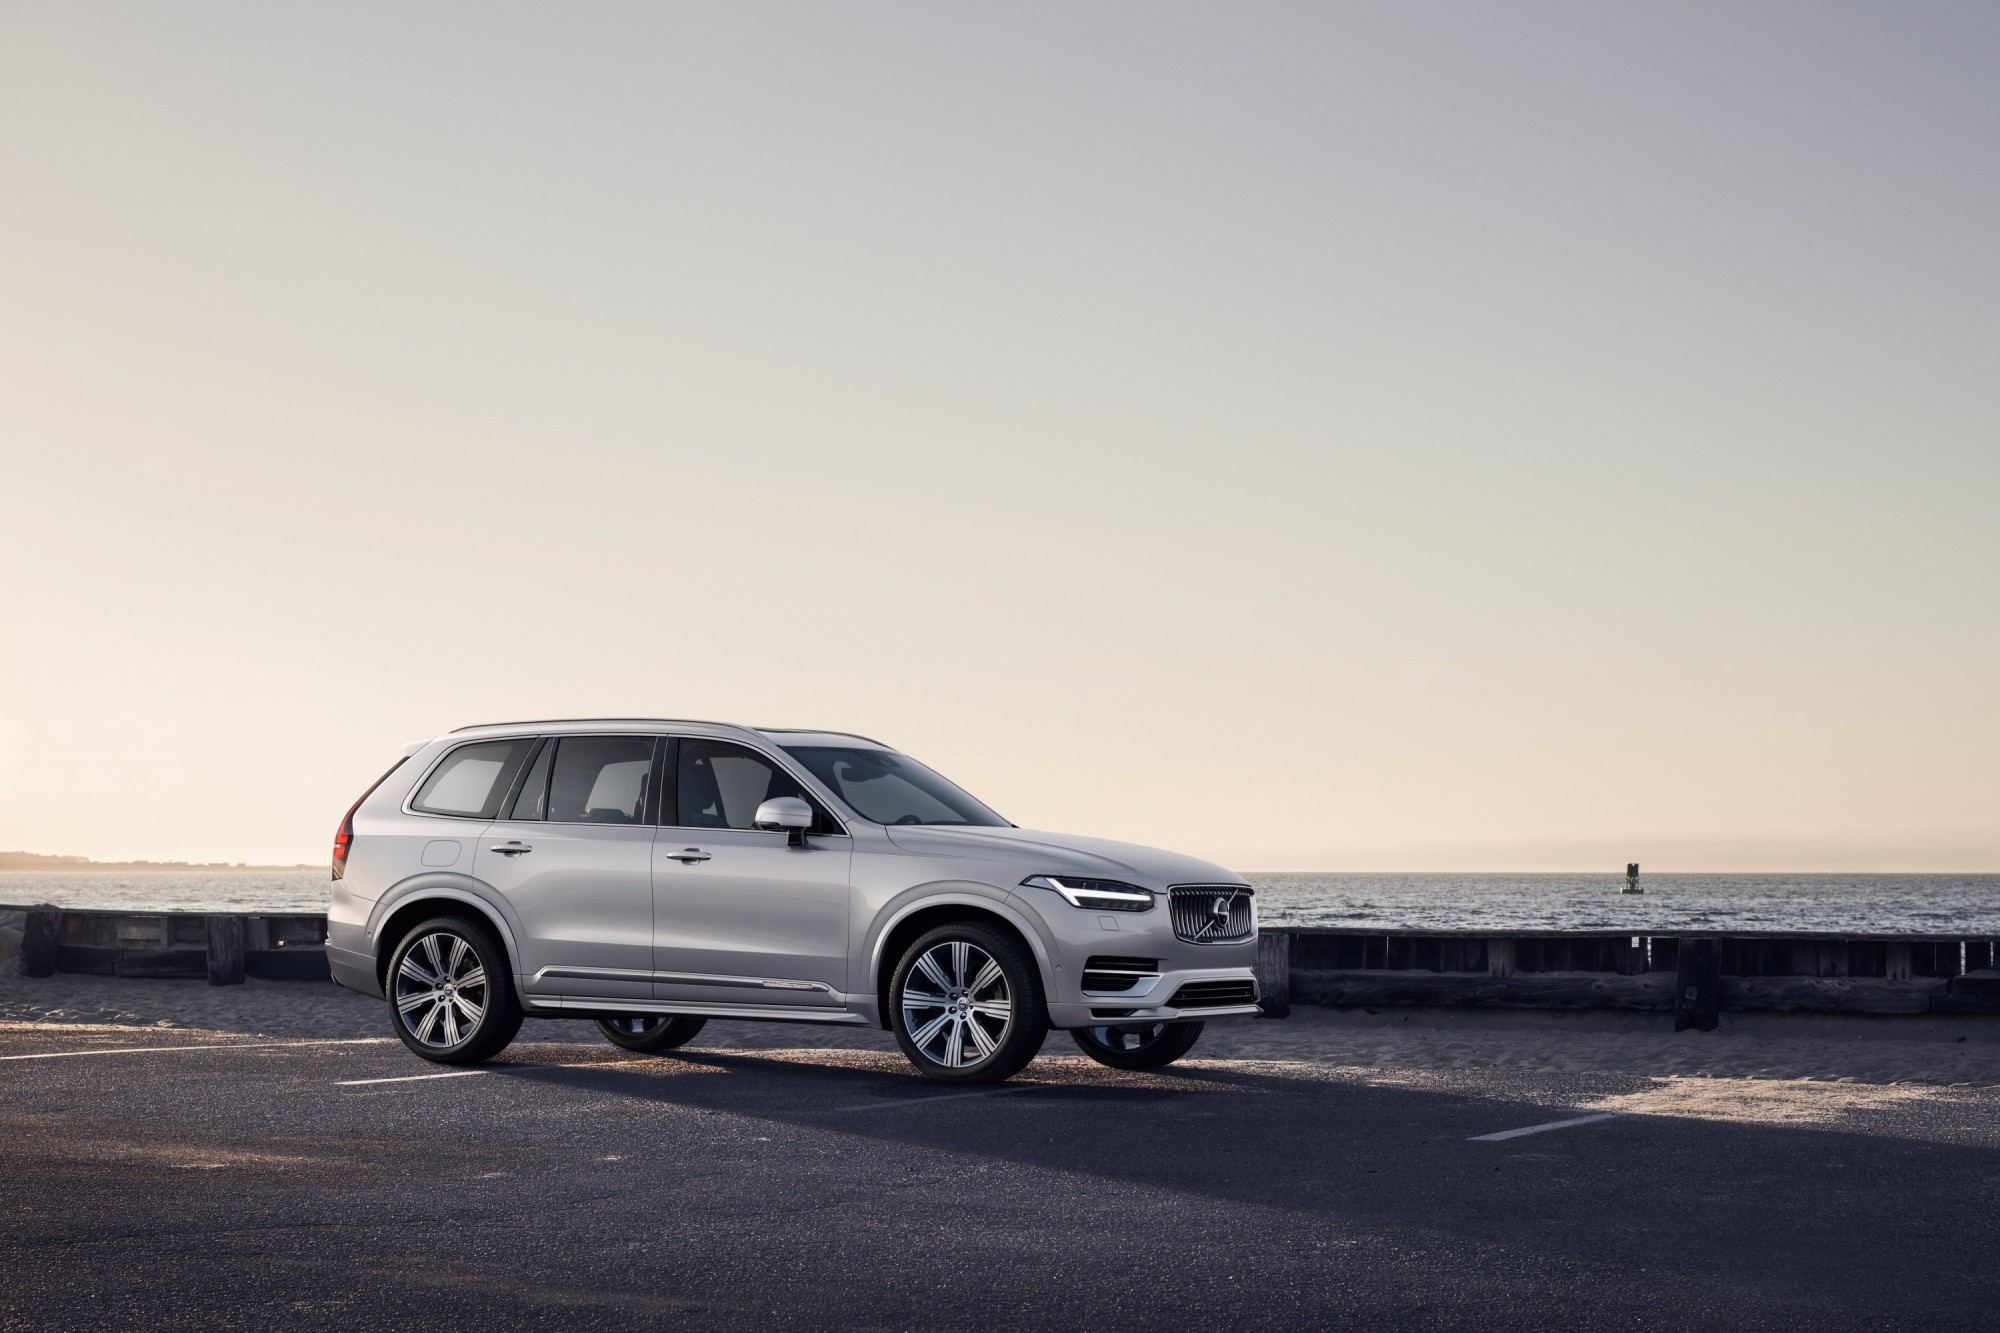 Volvo SA offering a year of free electricity with XC90 T8 purchase